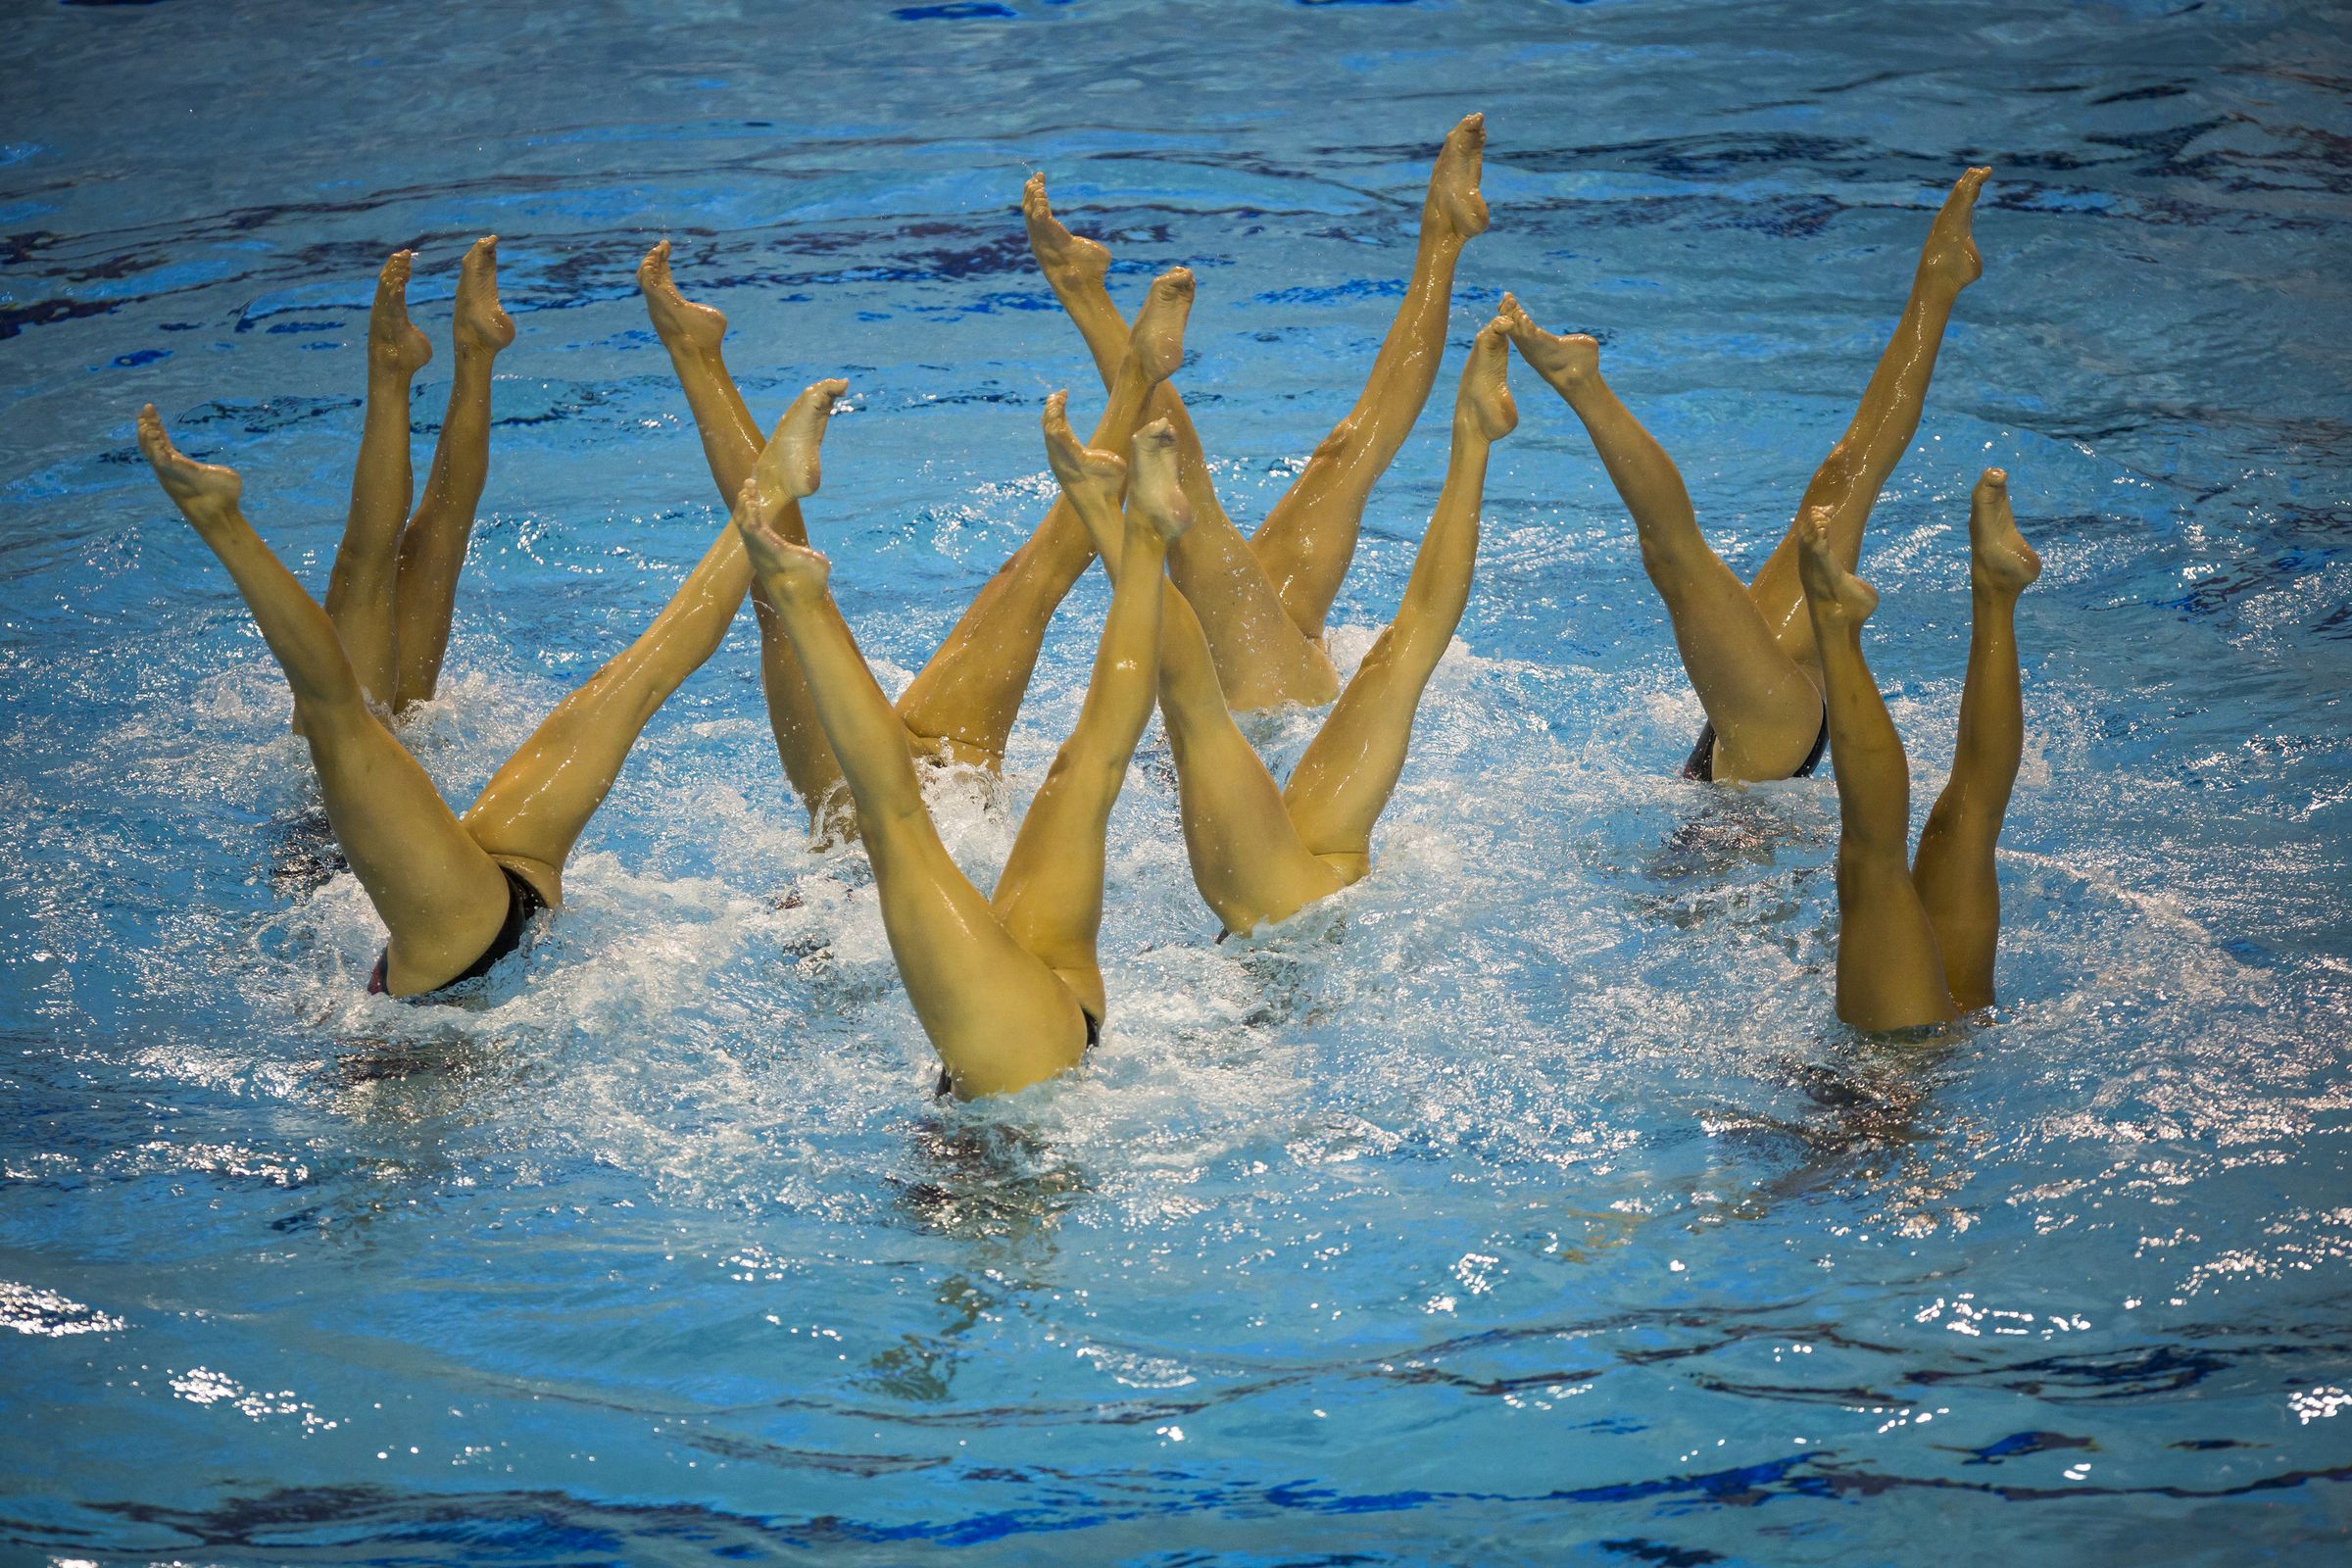 fina-synchronized-swimming-world-cup-2014 (36) - Swimming World News